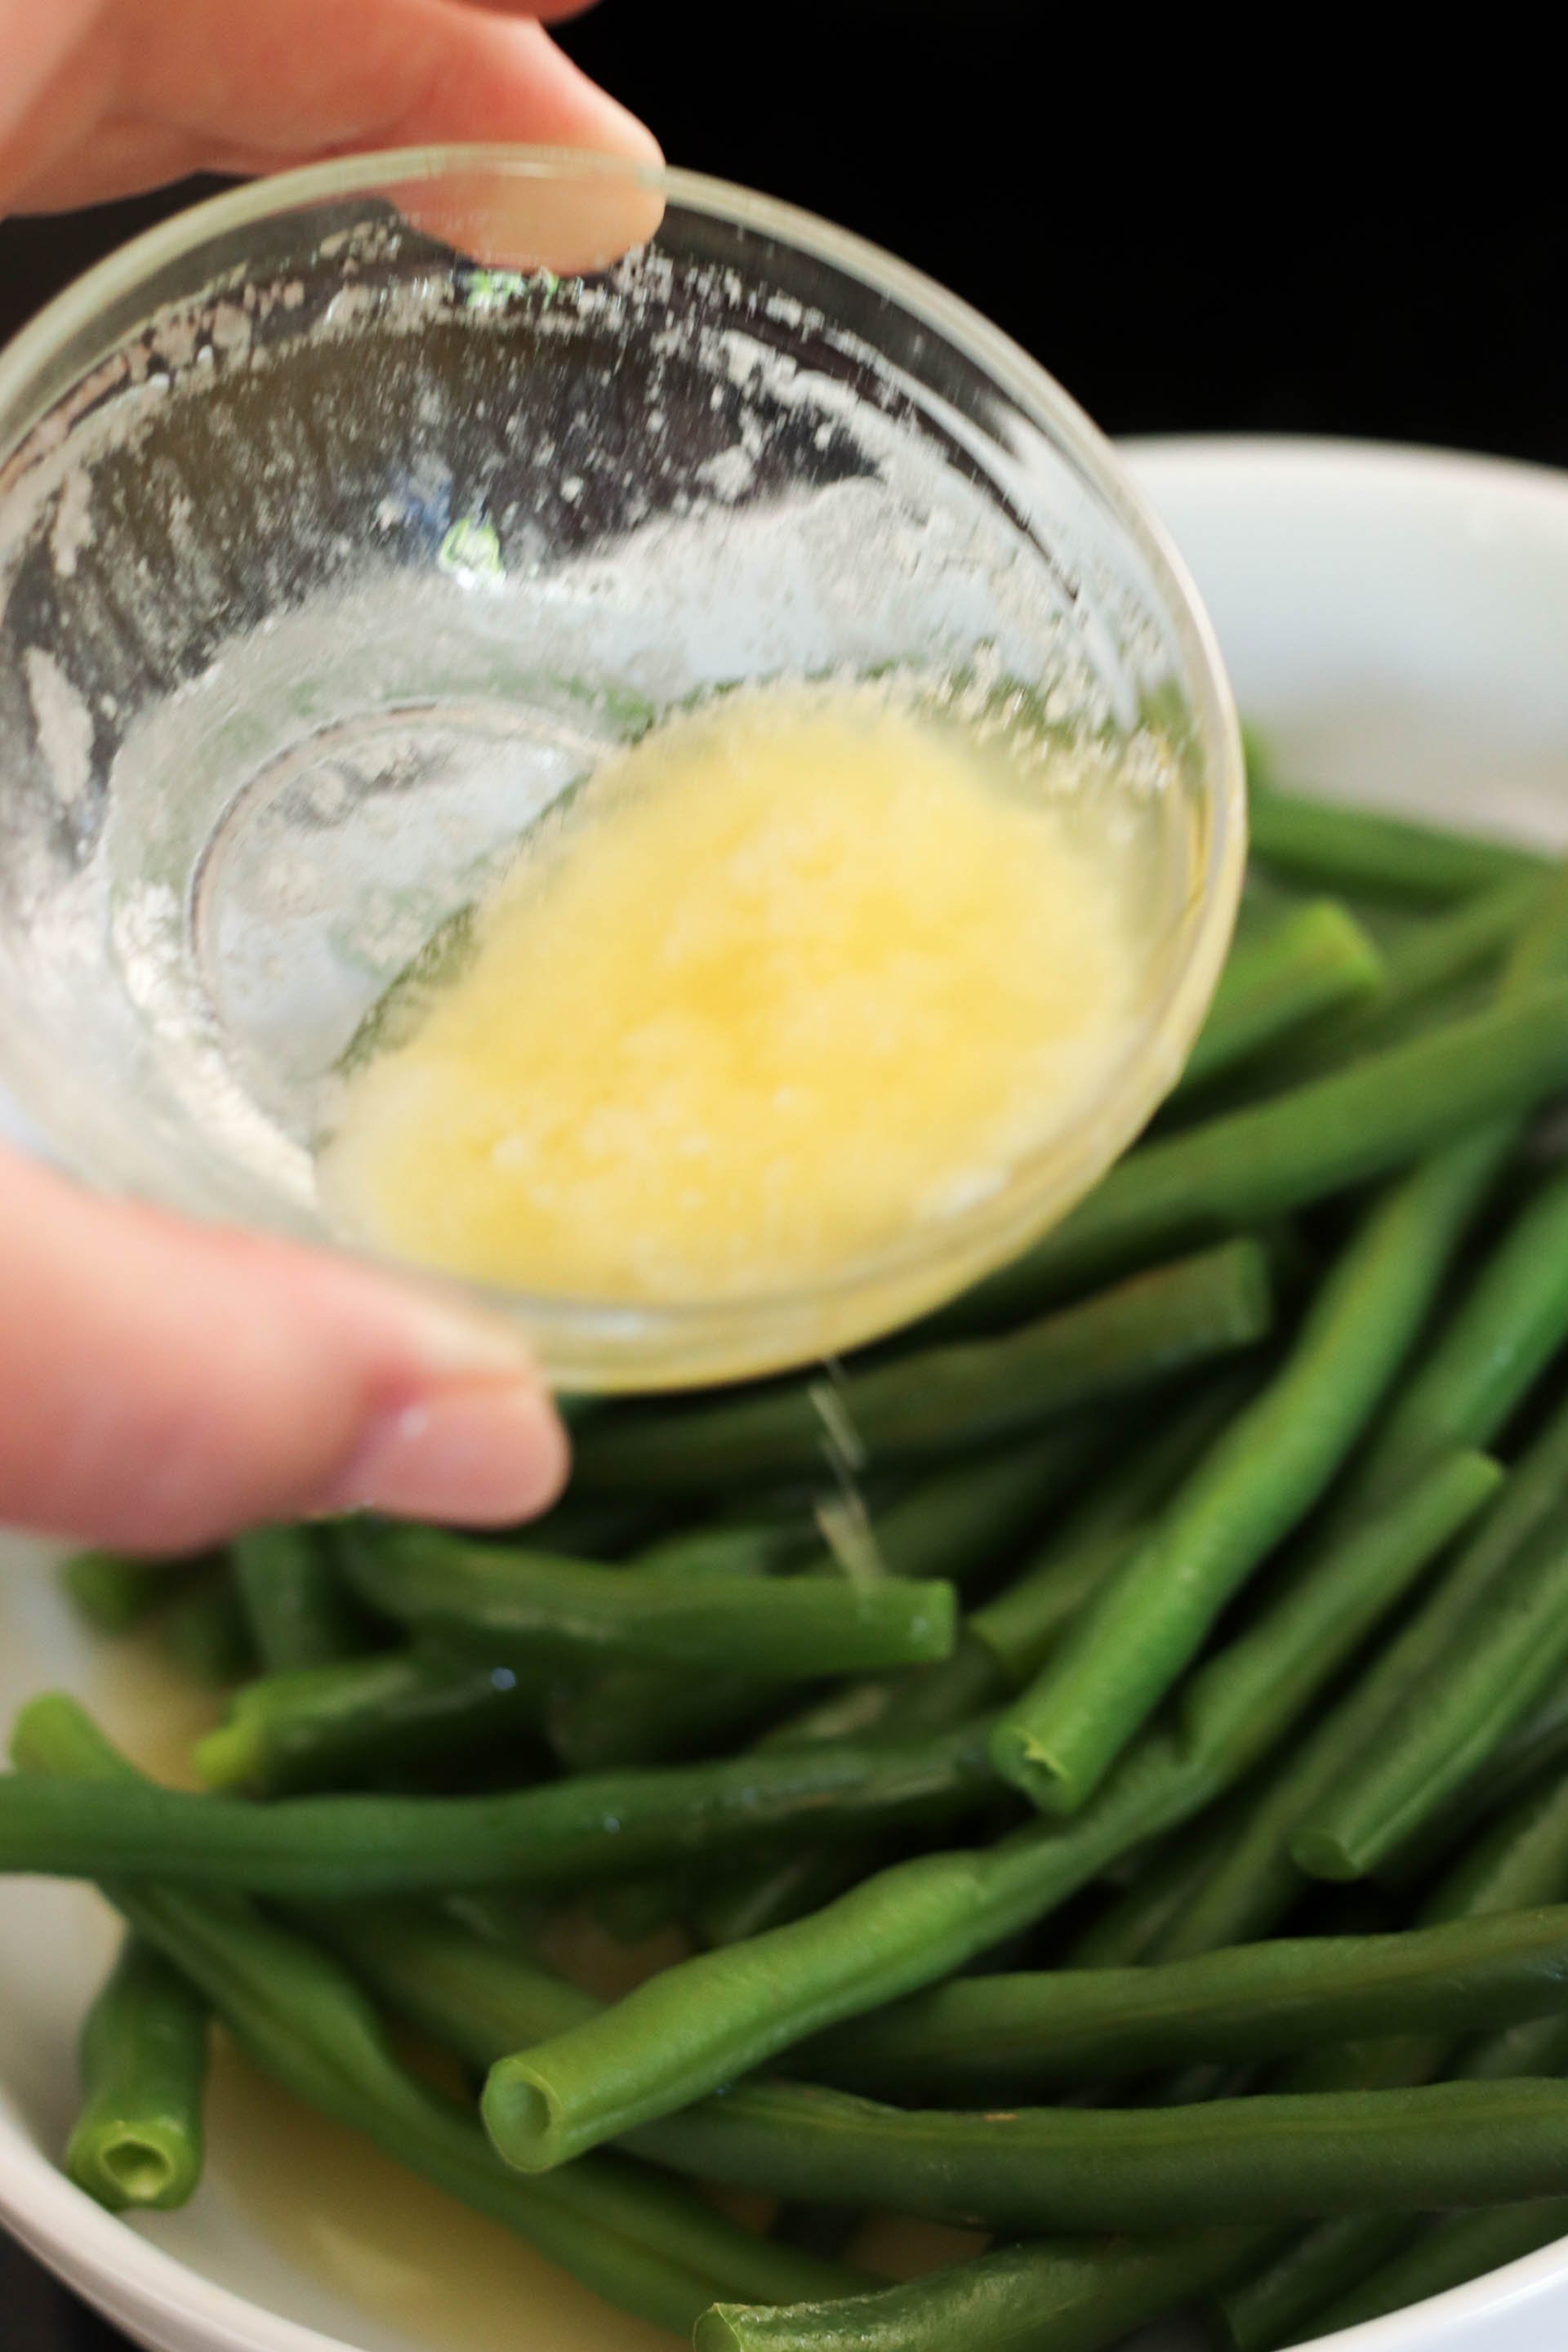 Pouring melted butter and seasonings over green beans